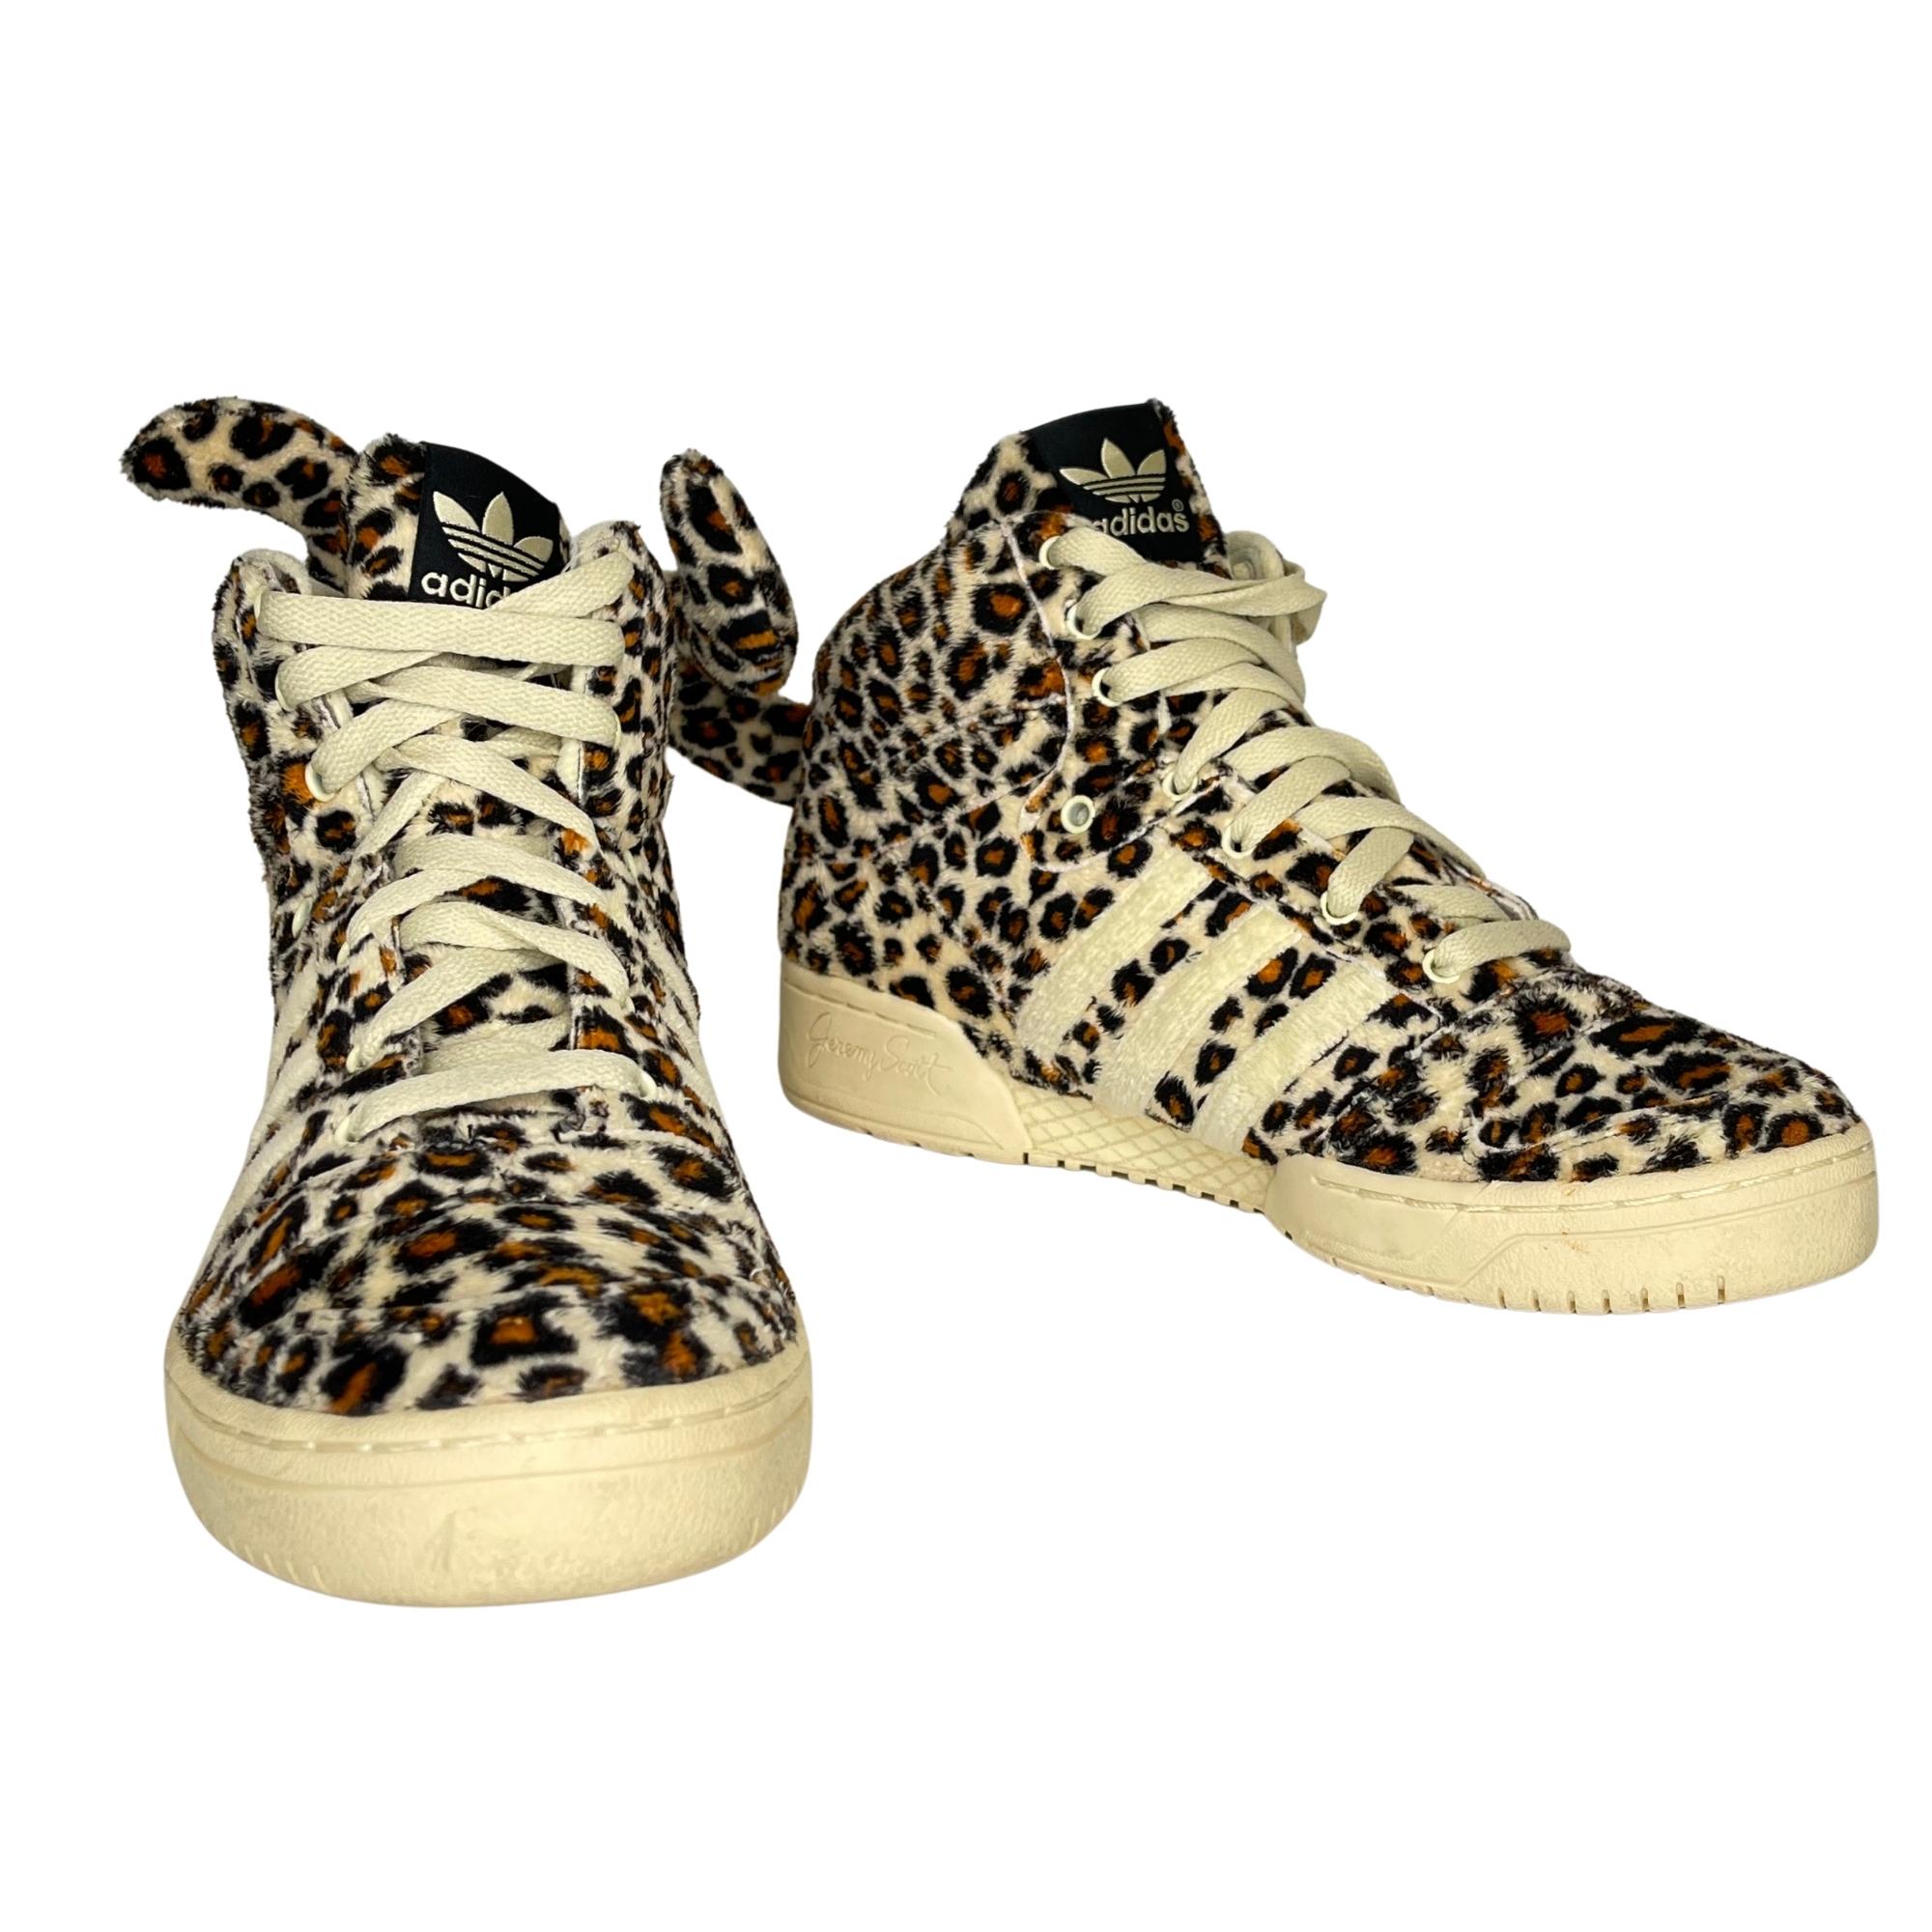 Release Date: 02/20/2012

COLOR: Cheetah print
ITEM CODE: V24636
SIZE: 8.5 US / 42 EU
EST. RETAIL: $200
CONDITION: Excellent - like new shoes. 

Made in Indonesia